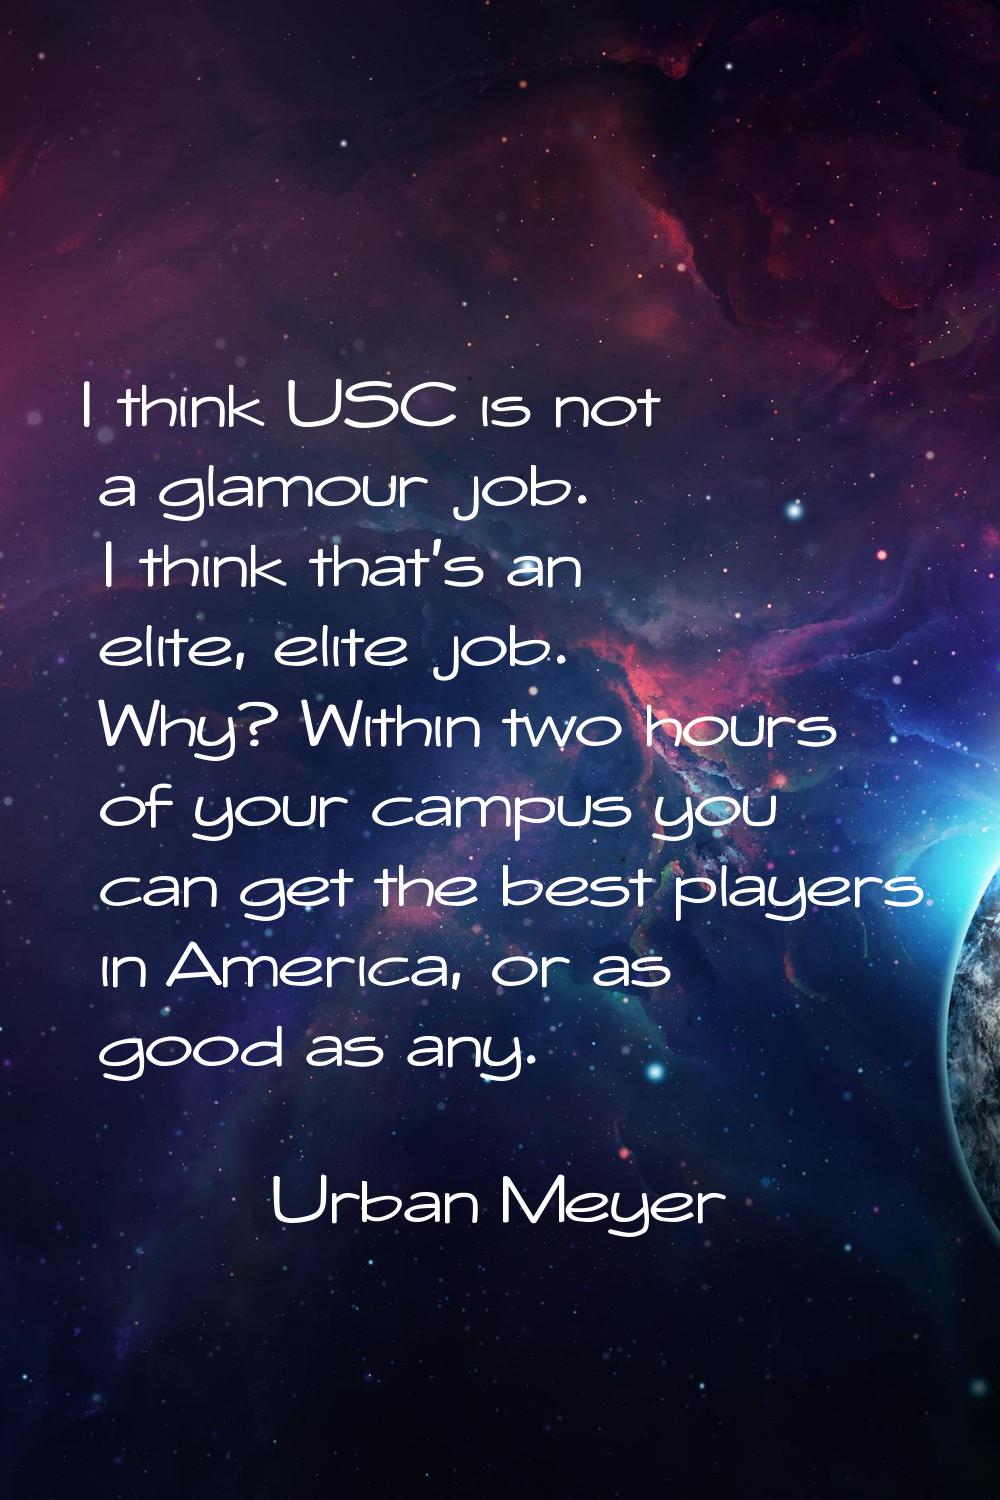 I think USC is not a glamour job. I think that's an elite, elite job. Why? Within two hours of your